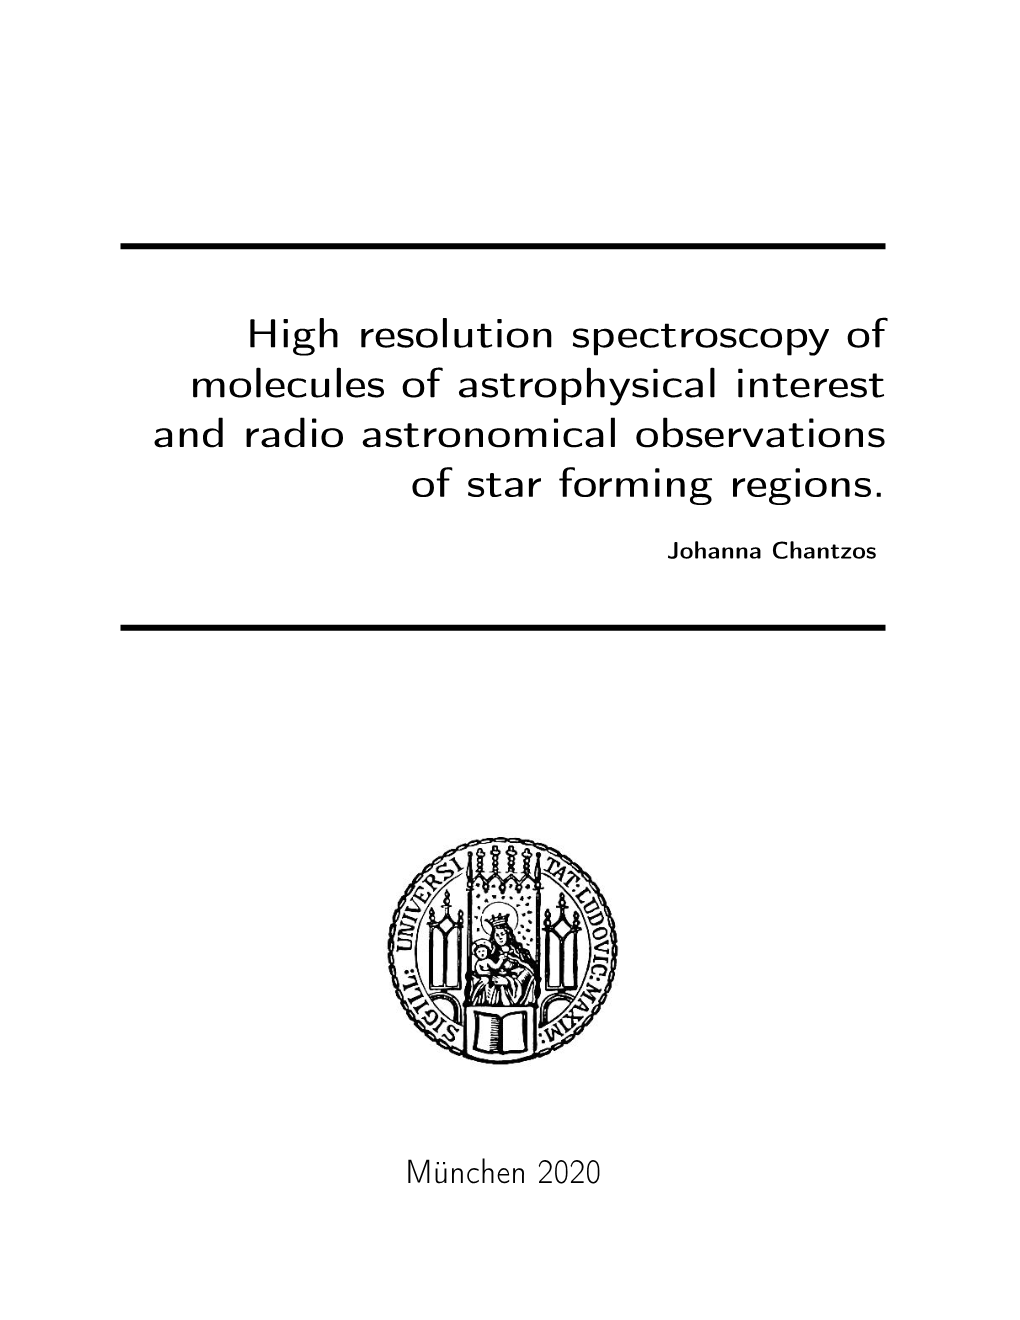 High Resolution Spectroscopy of Molecules of Astrophysical Interest and Radio Astronomical Observations of Star Forming Regions